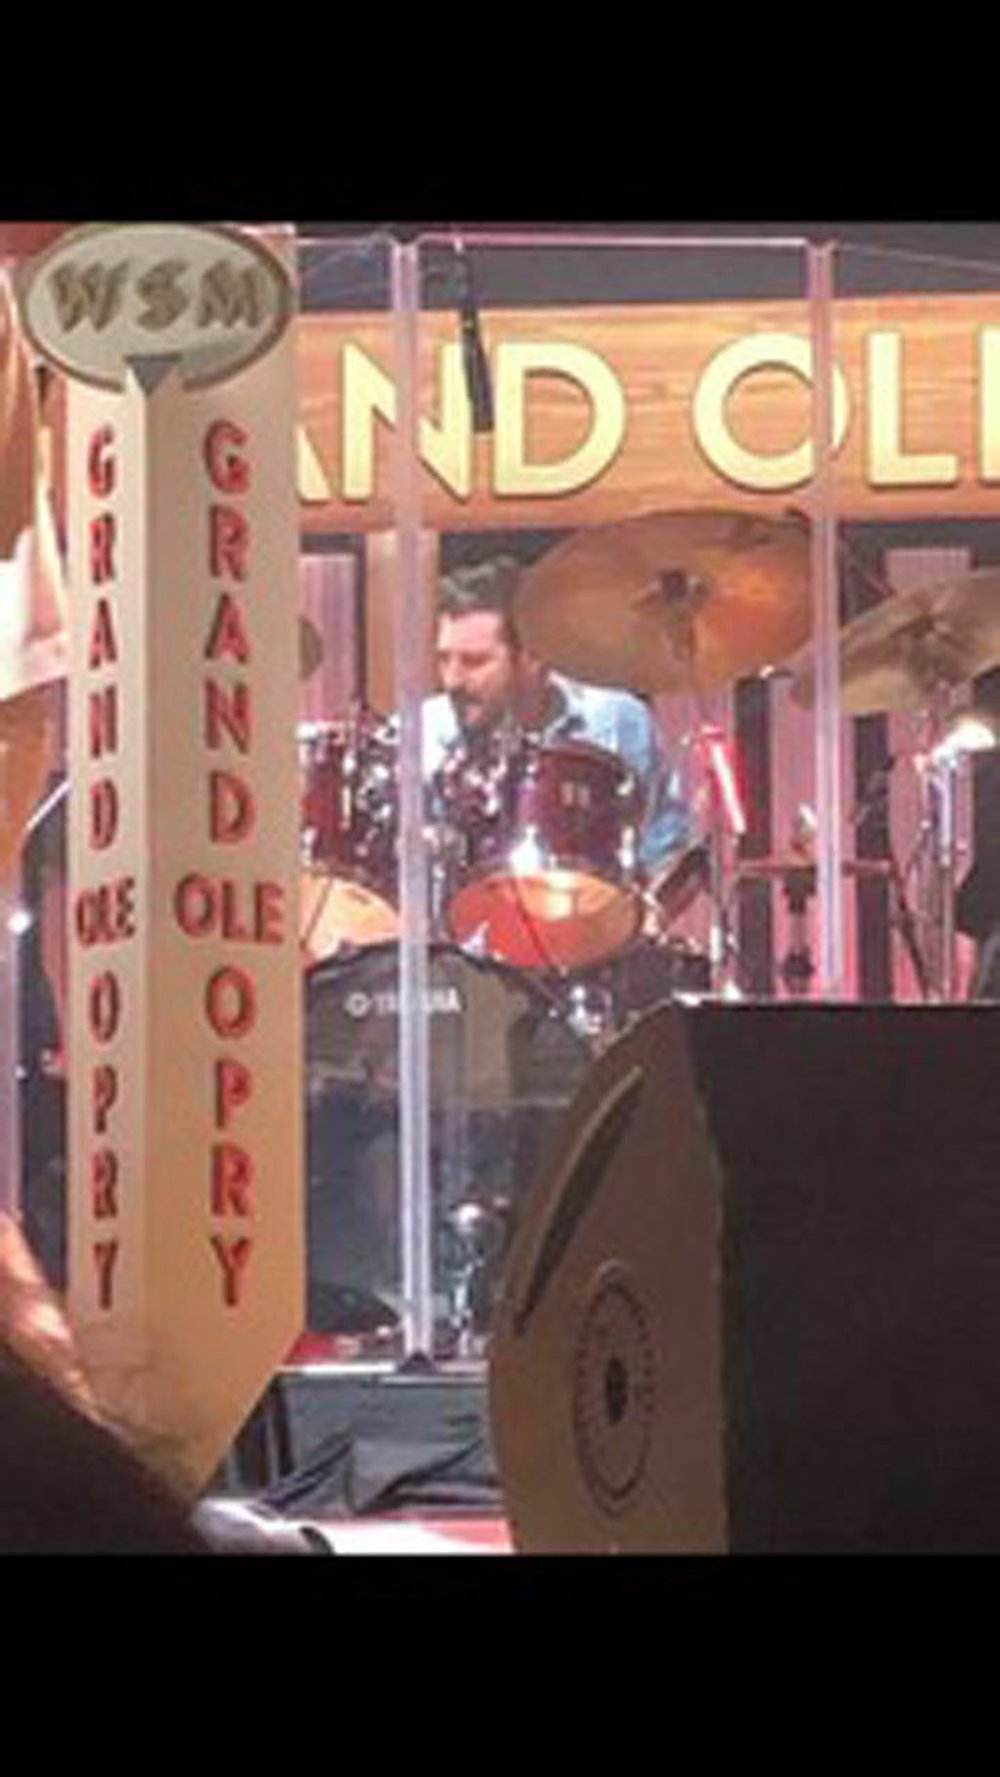 Duran Crone, a former drummer for the Music Mountain Jamboree Show, recently made his inaugural appearance at the Grand Ole Opry at the Ryman Auditorium. - Submitted photo